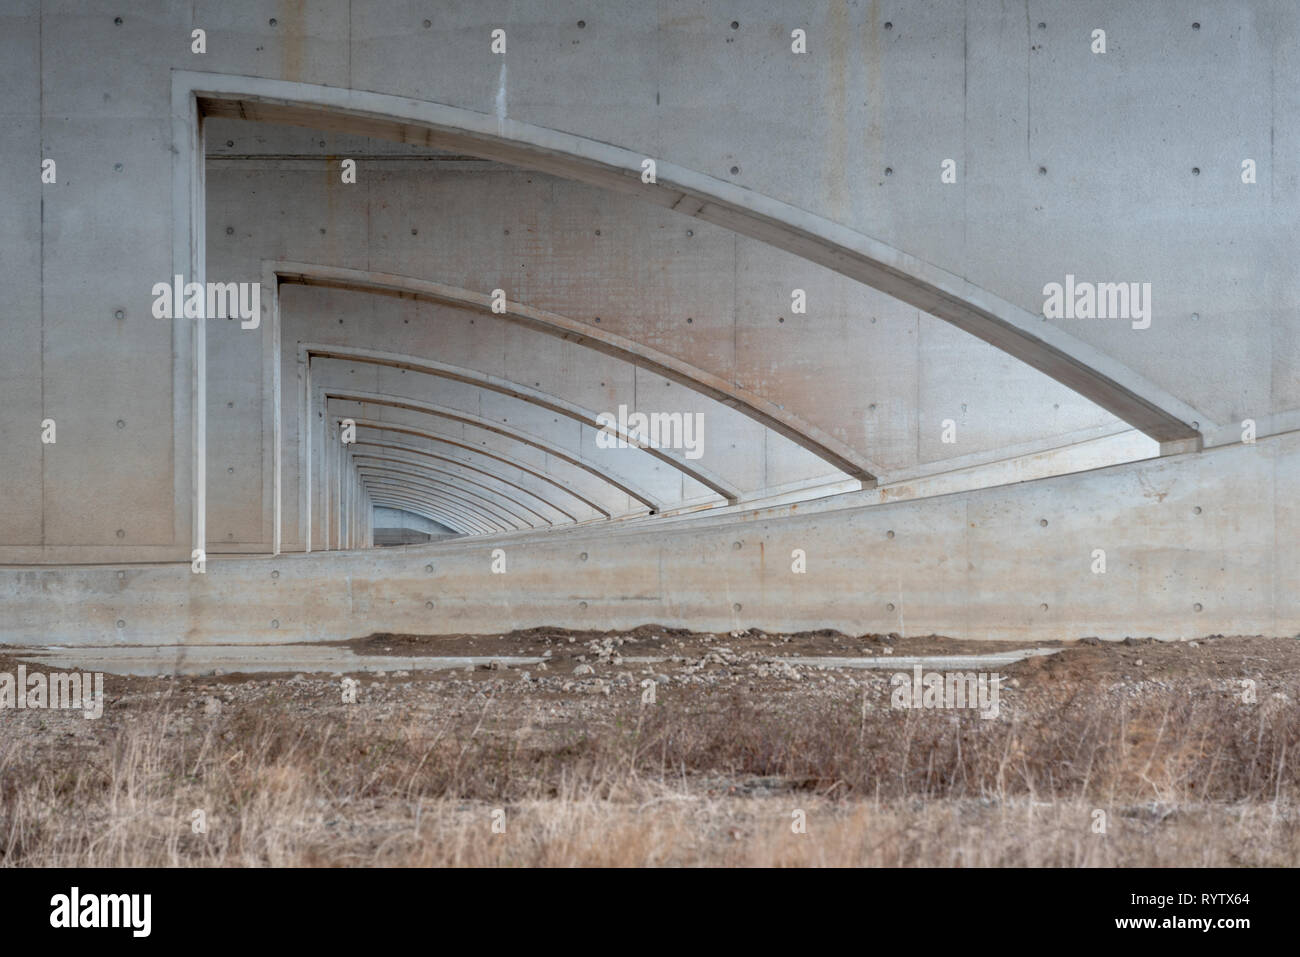 Magdeburg, Germany - March 12, 2019: View of the bridge arches of the waterway intersection in Hohenwarthe, Germany. The bridge belongs to the Mittell Stock Photo